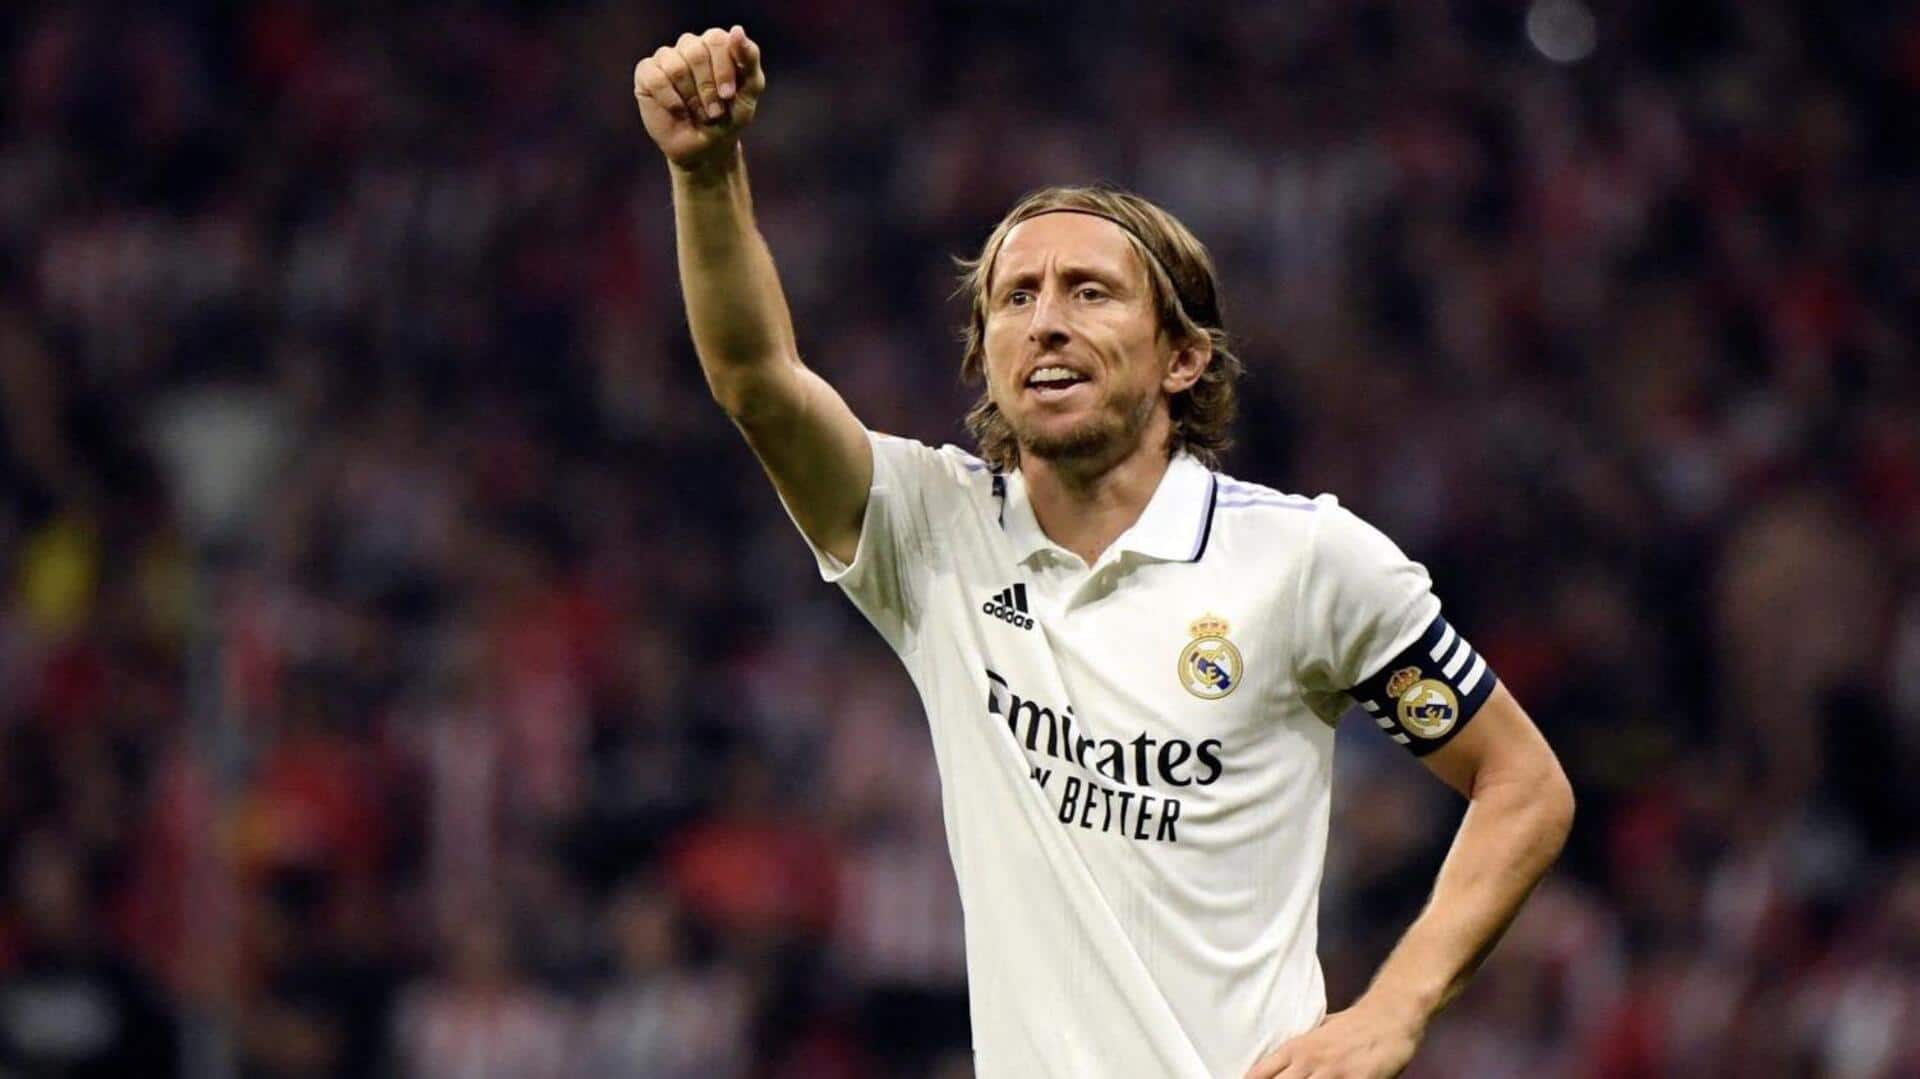 Luka Modric extends contract with Real Madrid: Decoding his stats